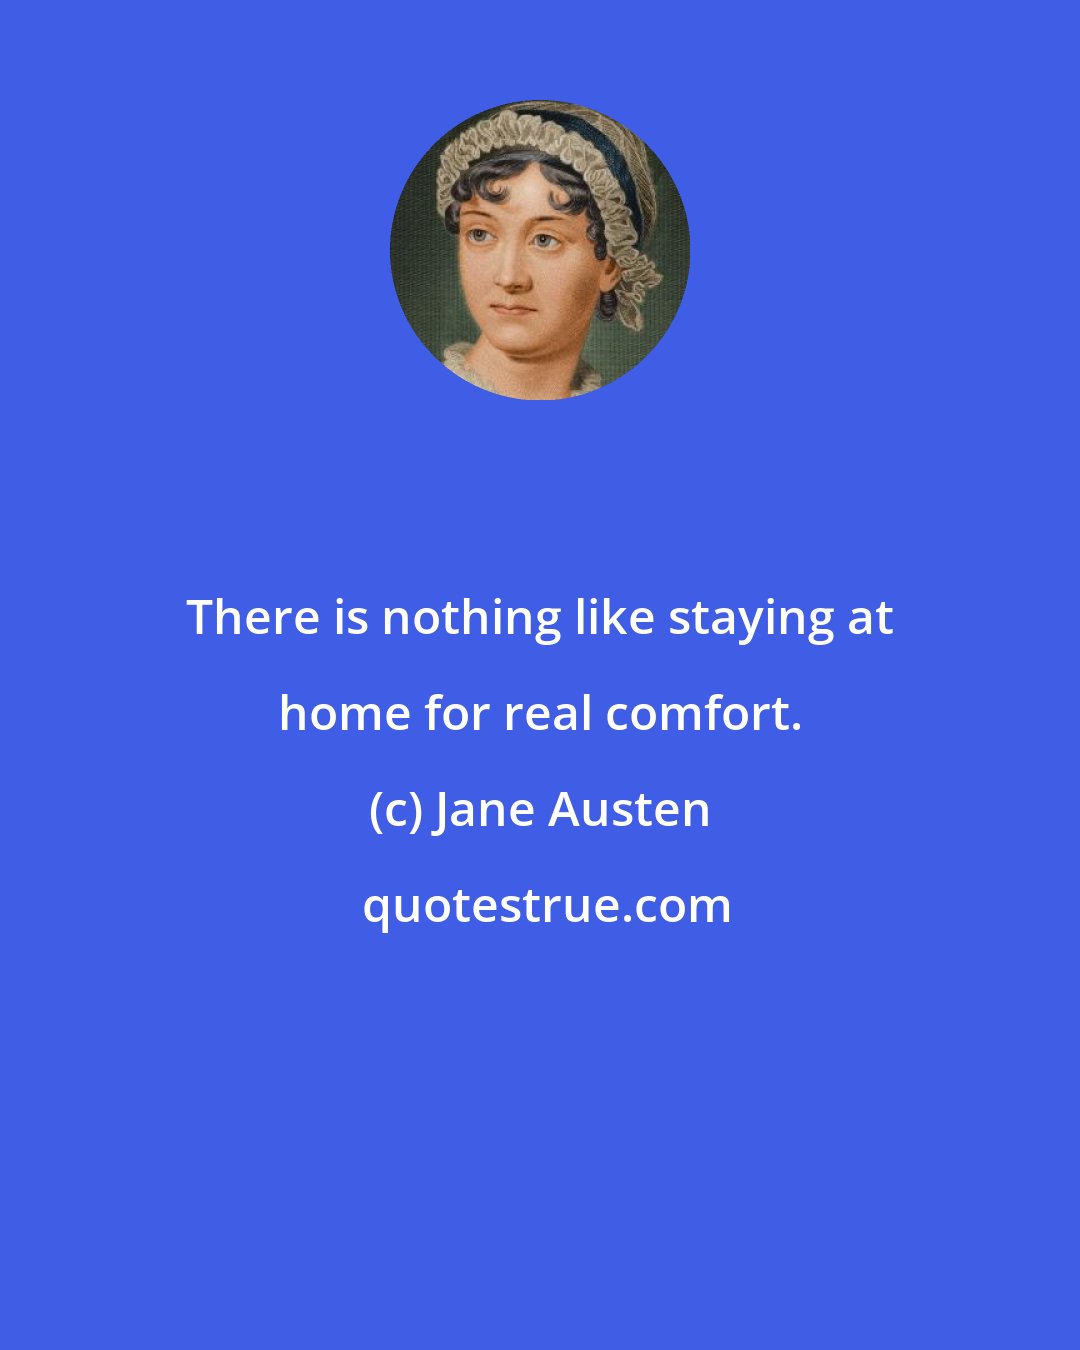 Jane Austen: There is nothing like staying at home for real comfort.